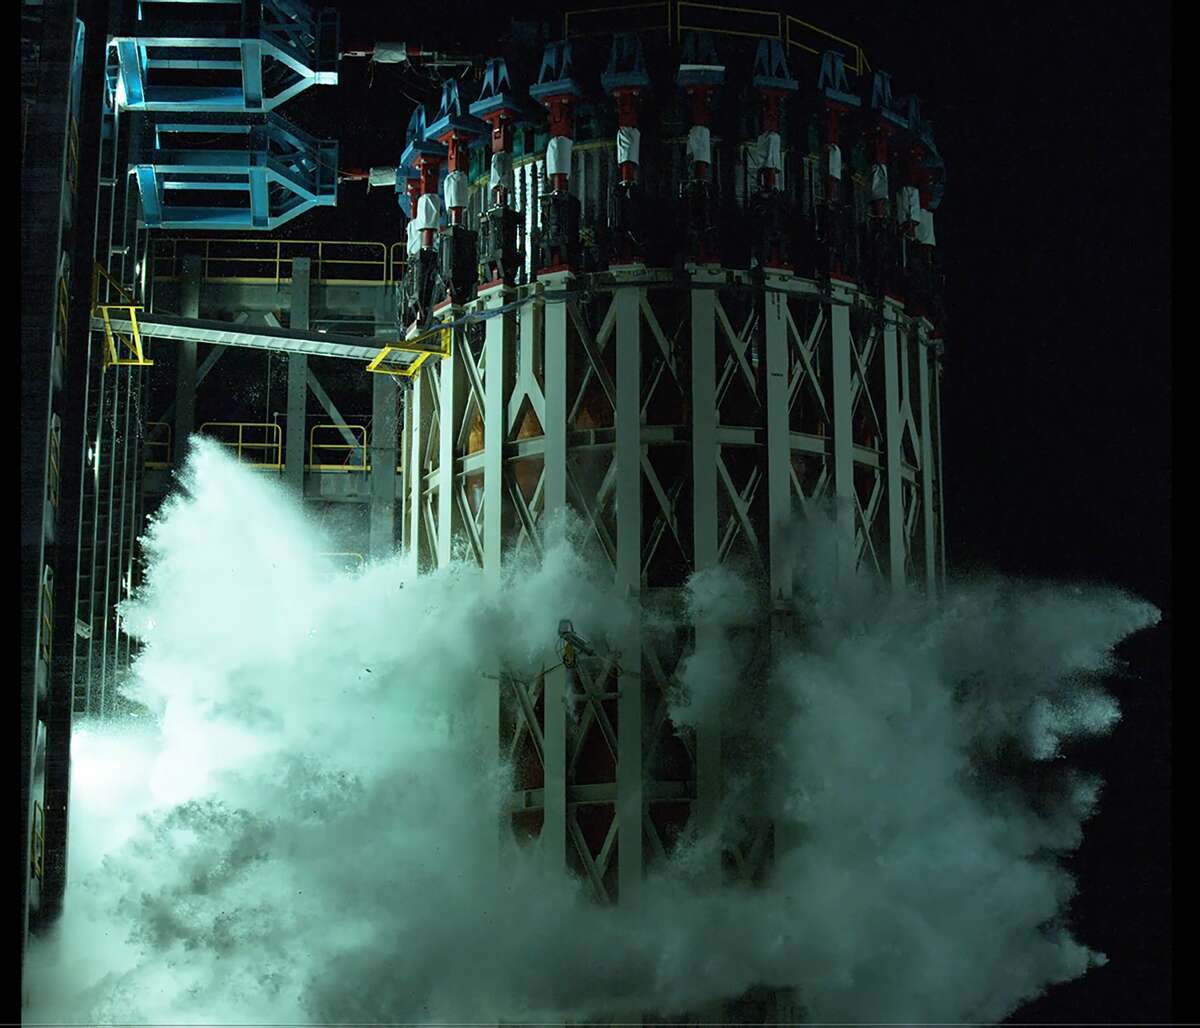 The June 24 test pushed the liquid oxygen tank test article beyond its limits to see how much force it would take to break the tank’s structure. This image shows water gushing out of the tank as it failed.